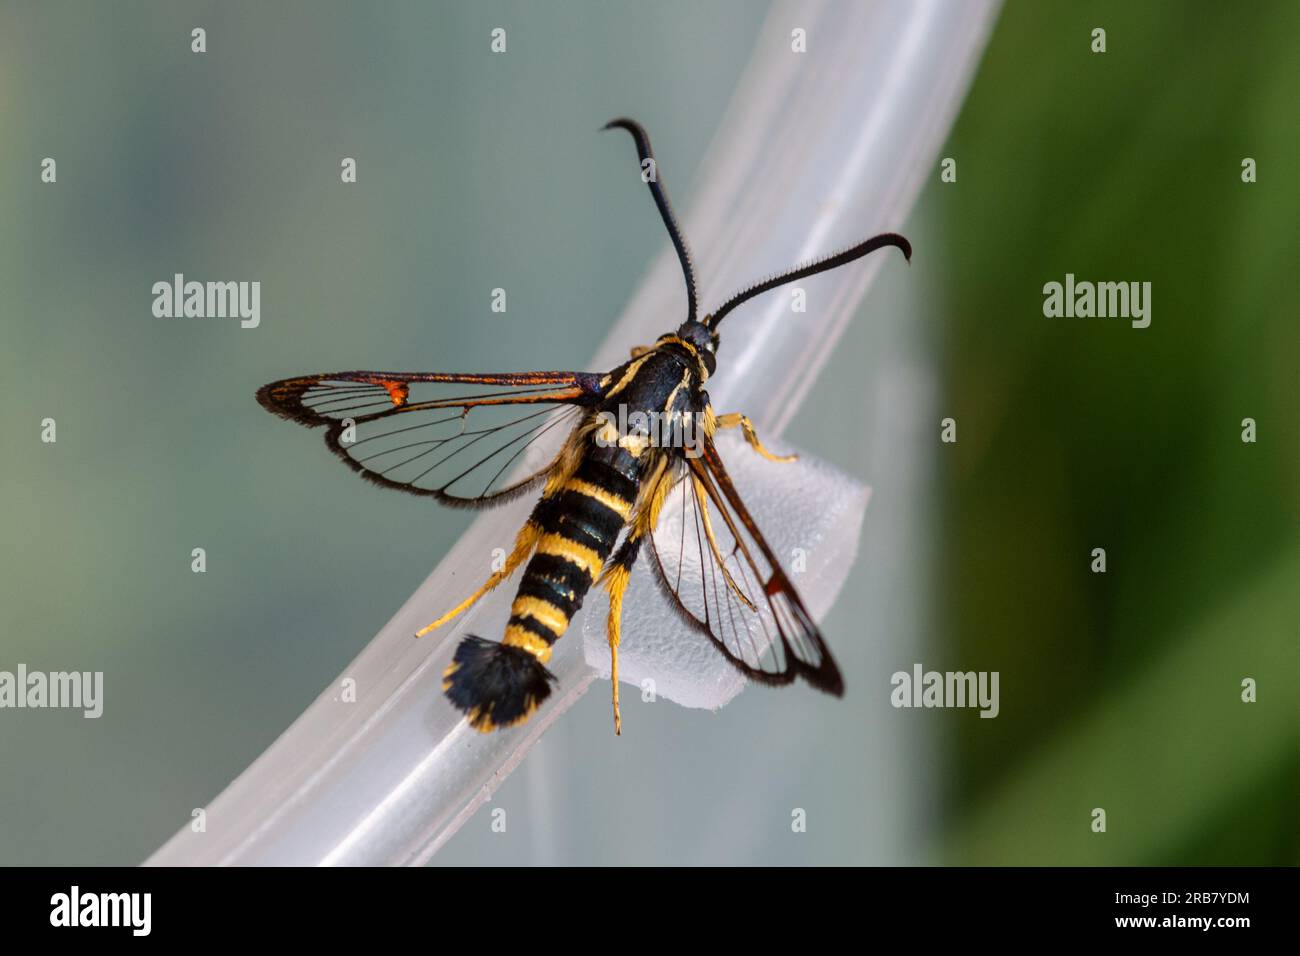 Yellow-legged clearwing moth (Synanthedon vespiformis), England, UK, male attracted using a pheromone lure in July or summer Stock Photo